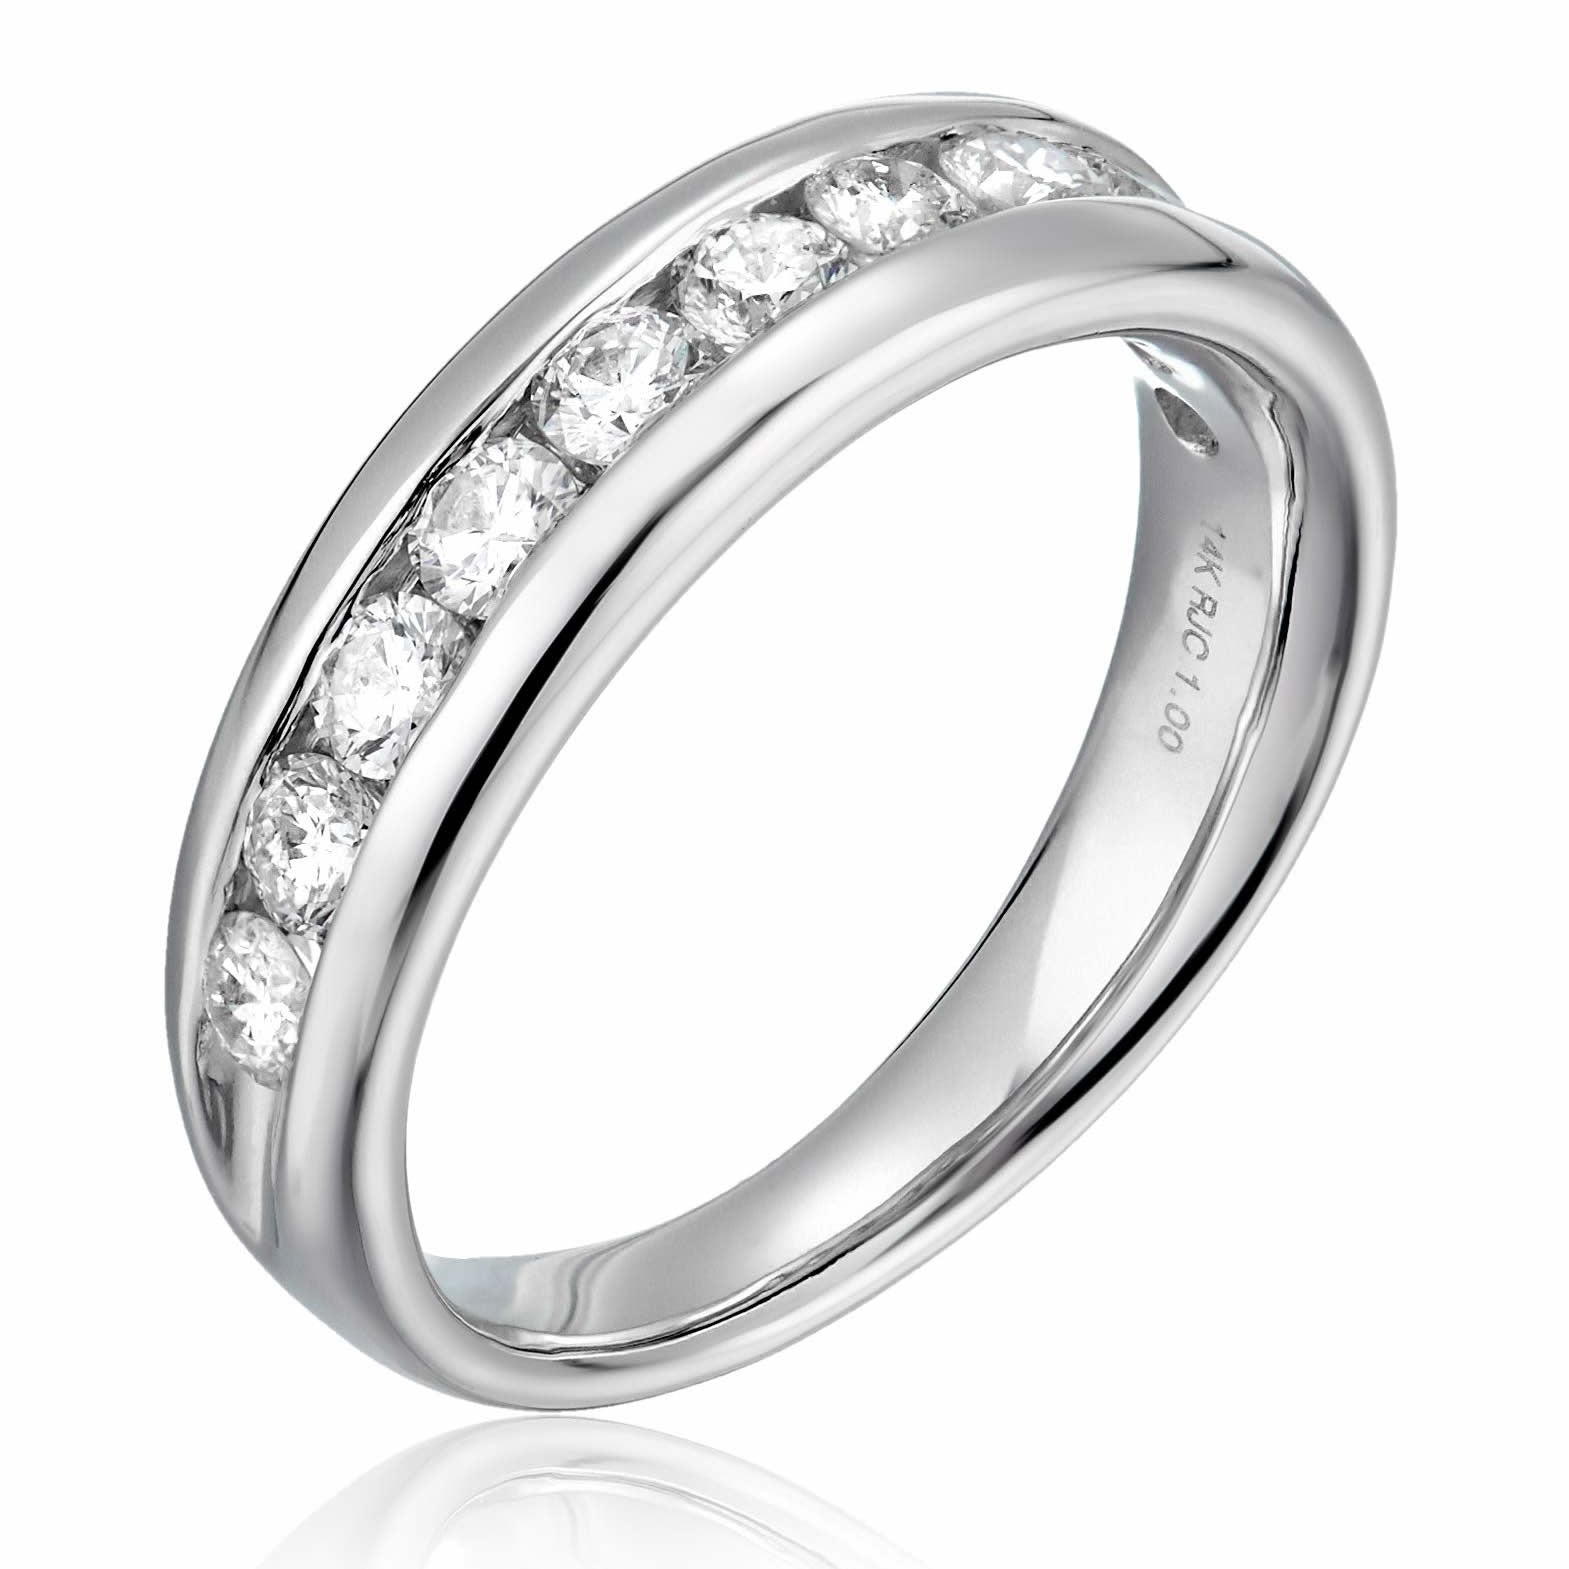 1/2 cttw Diamond Wedding Band for Women, Comfort Fit Diamond Wedding Band in 14K White Gold Channel Set, Size 4.5-10